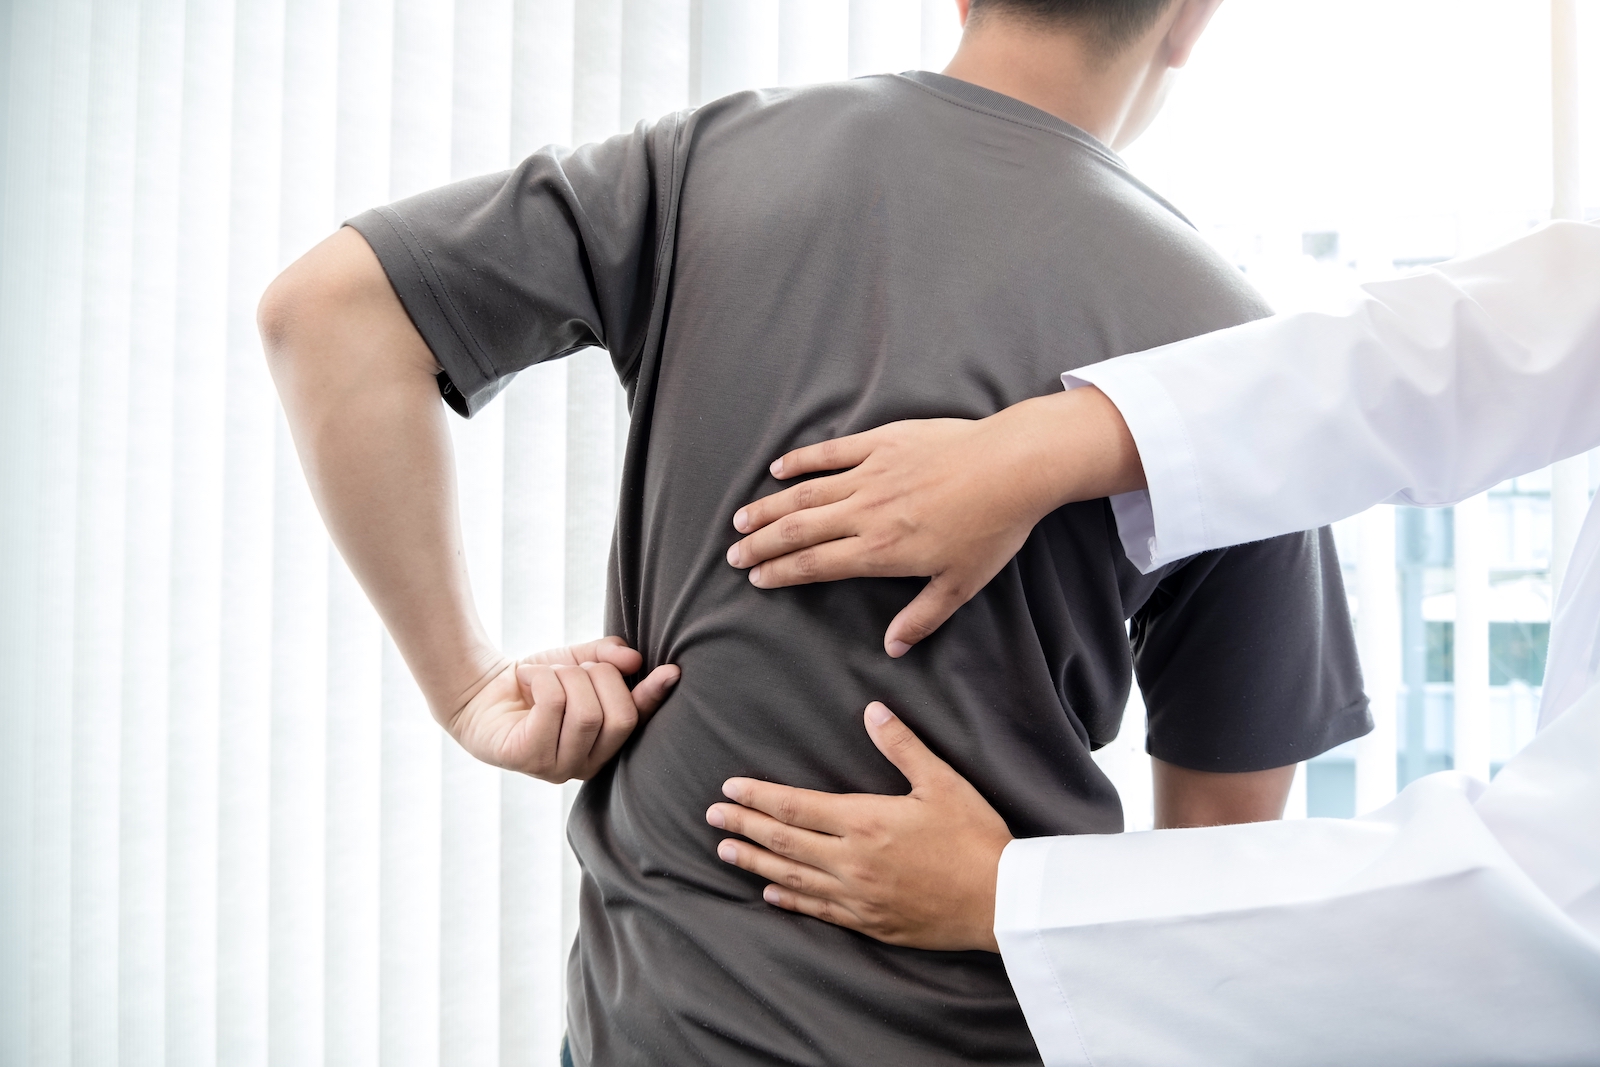 Male patients consulted physiotherapists with Low back pain for examination and treatment